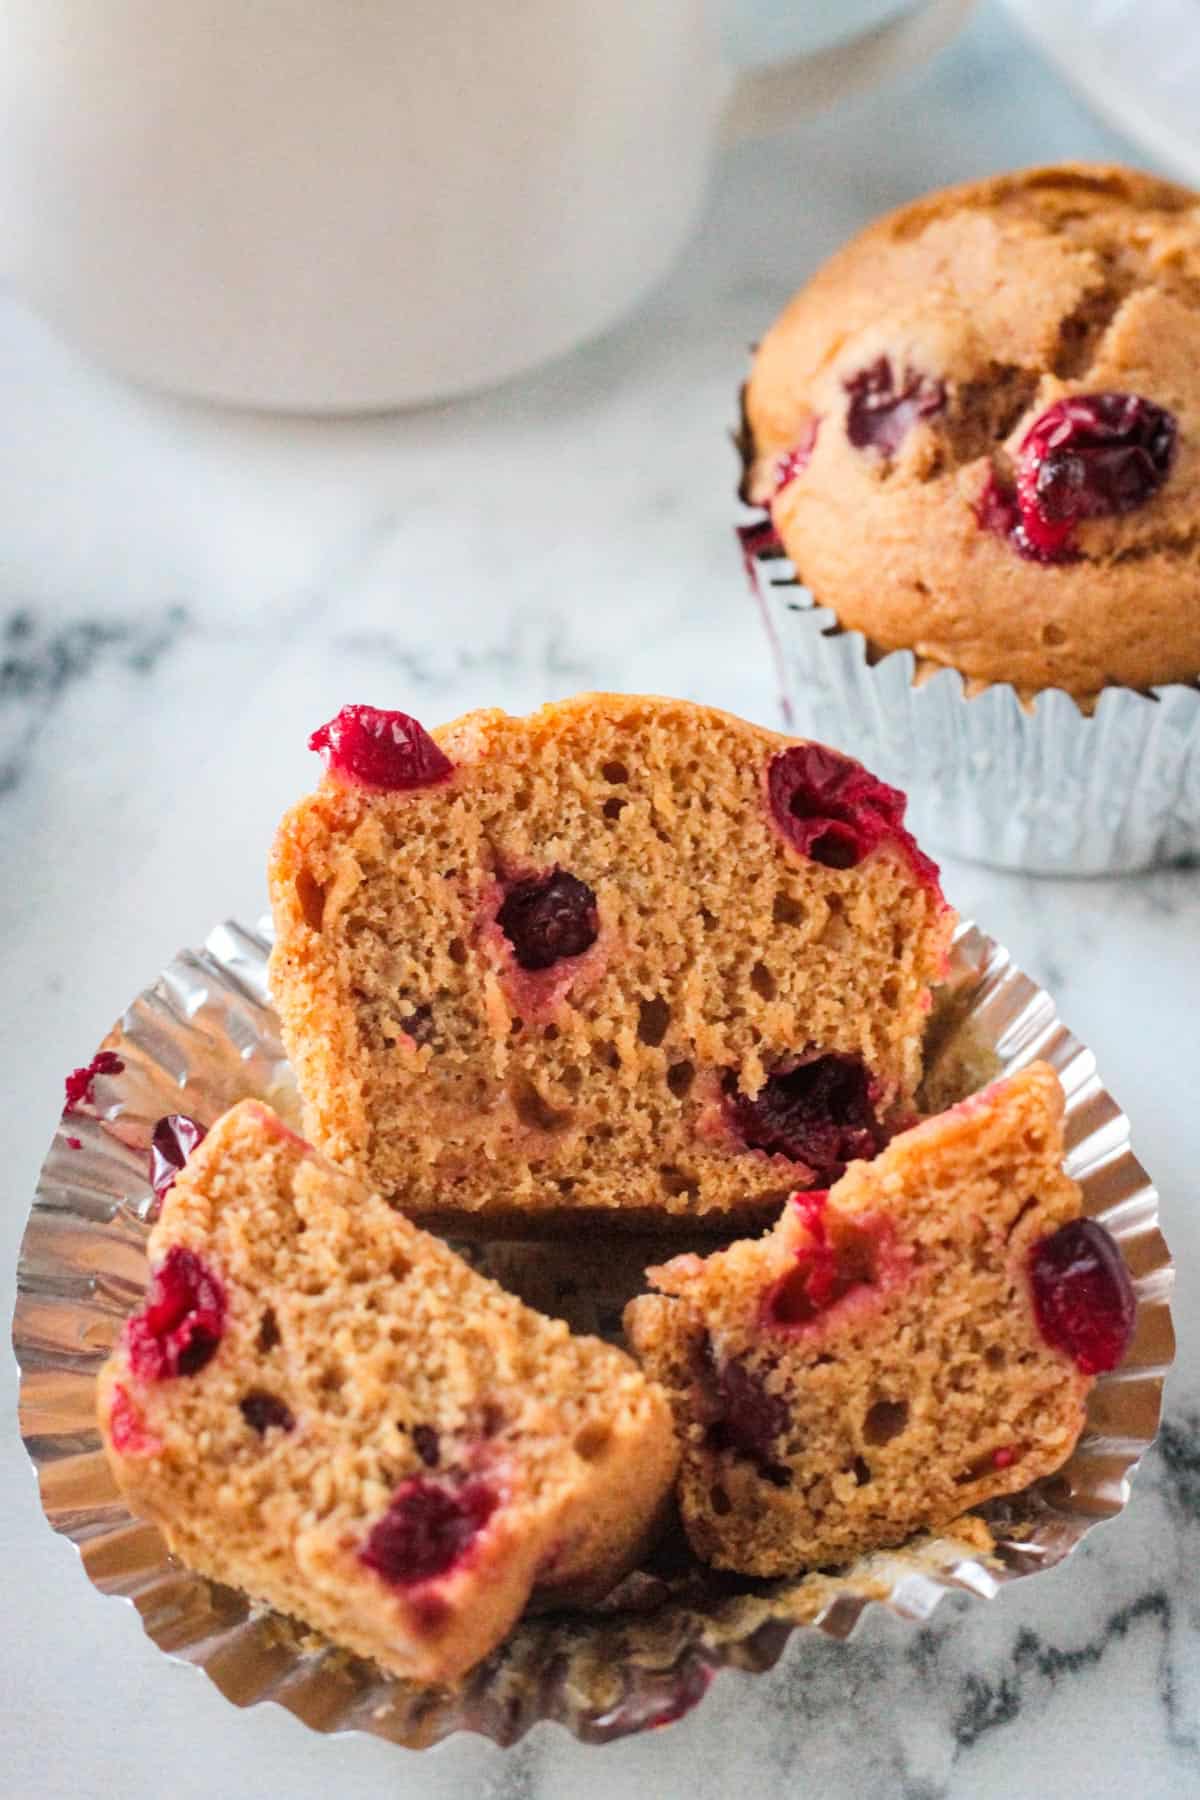 One pumpkin cranberry muffin cut into 3 pieces showing the fluffy inside.